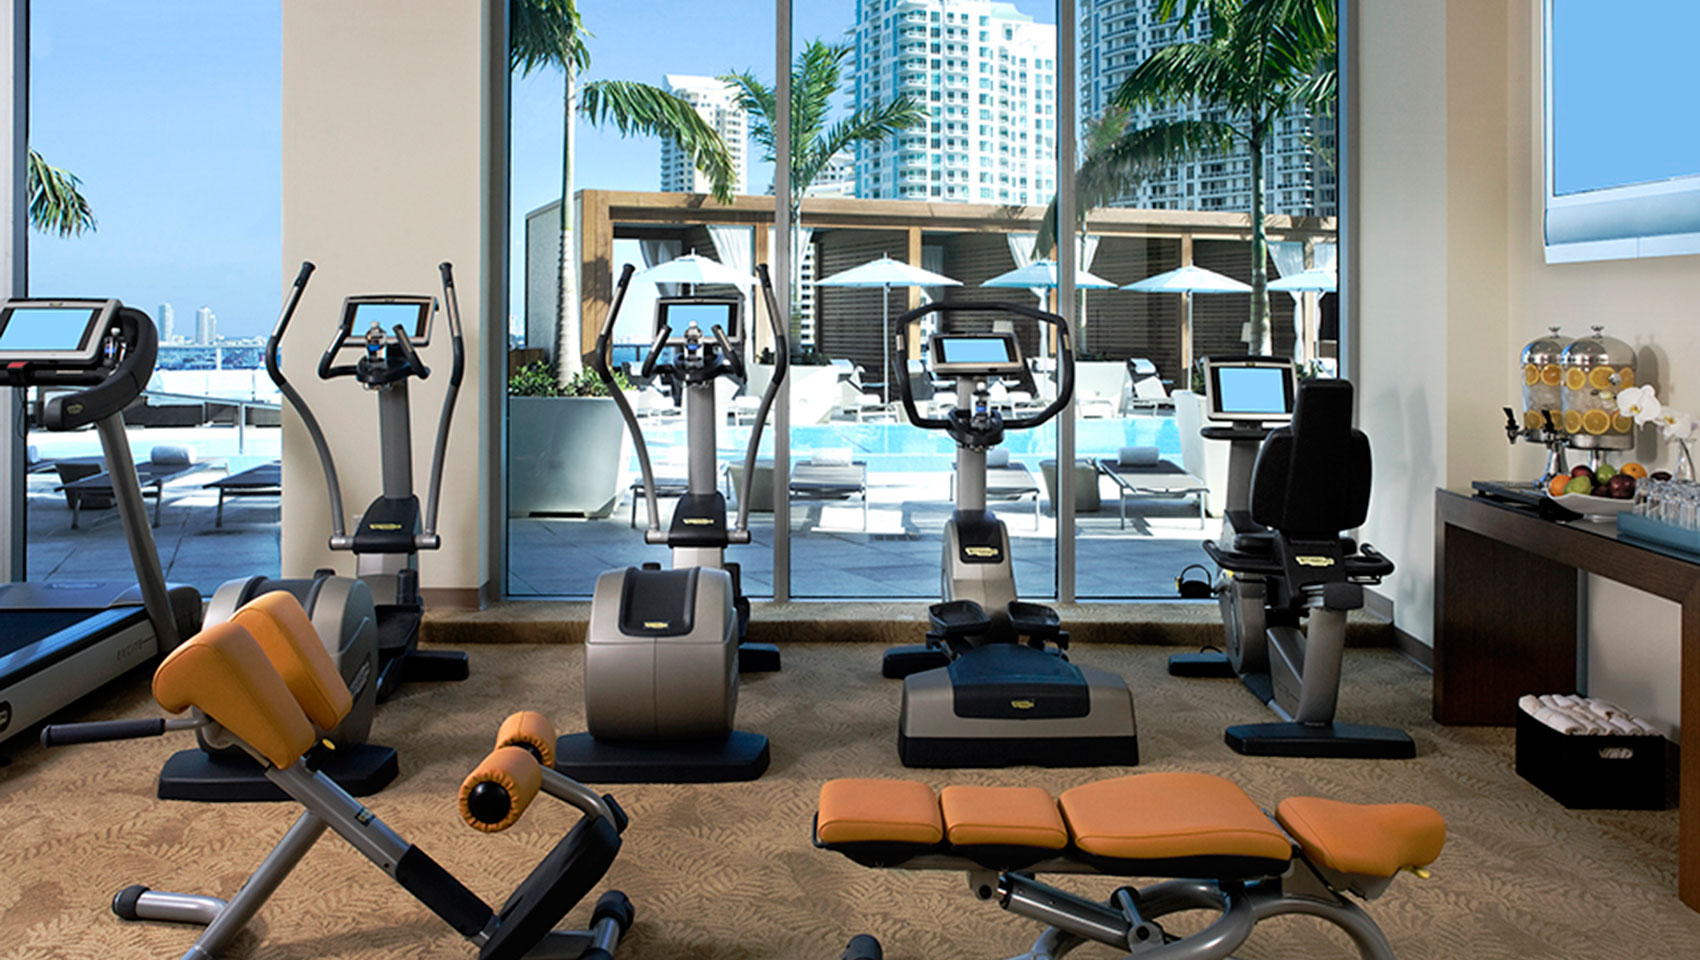 Fitness Center with exercise machines overlooking the pool